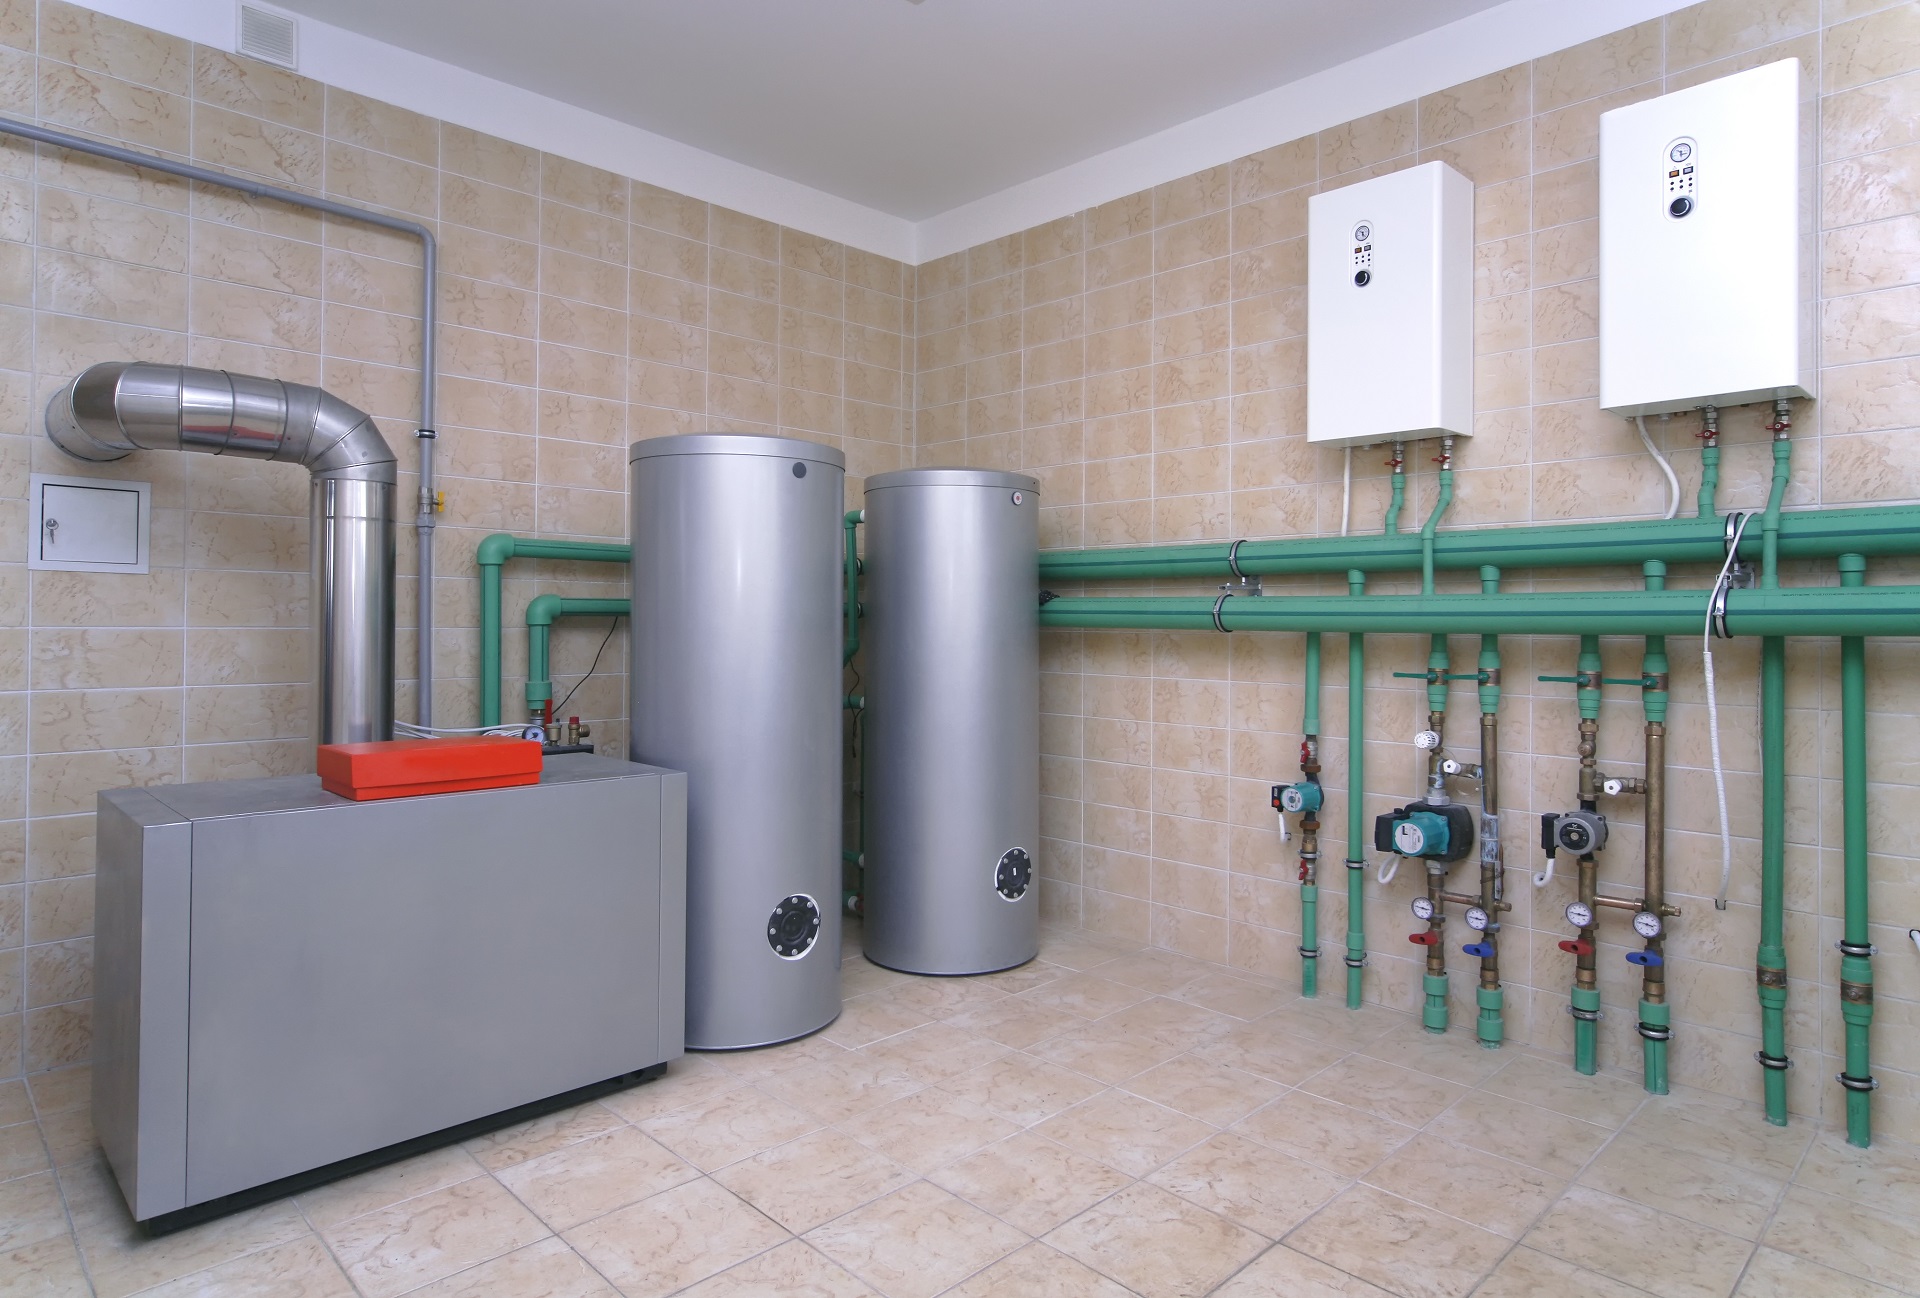 When Should Heating Systems be Converted from Steam to Hot Water Distribution?